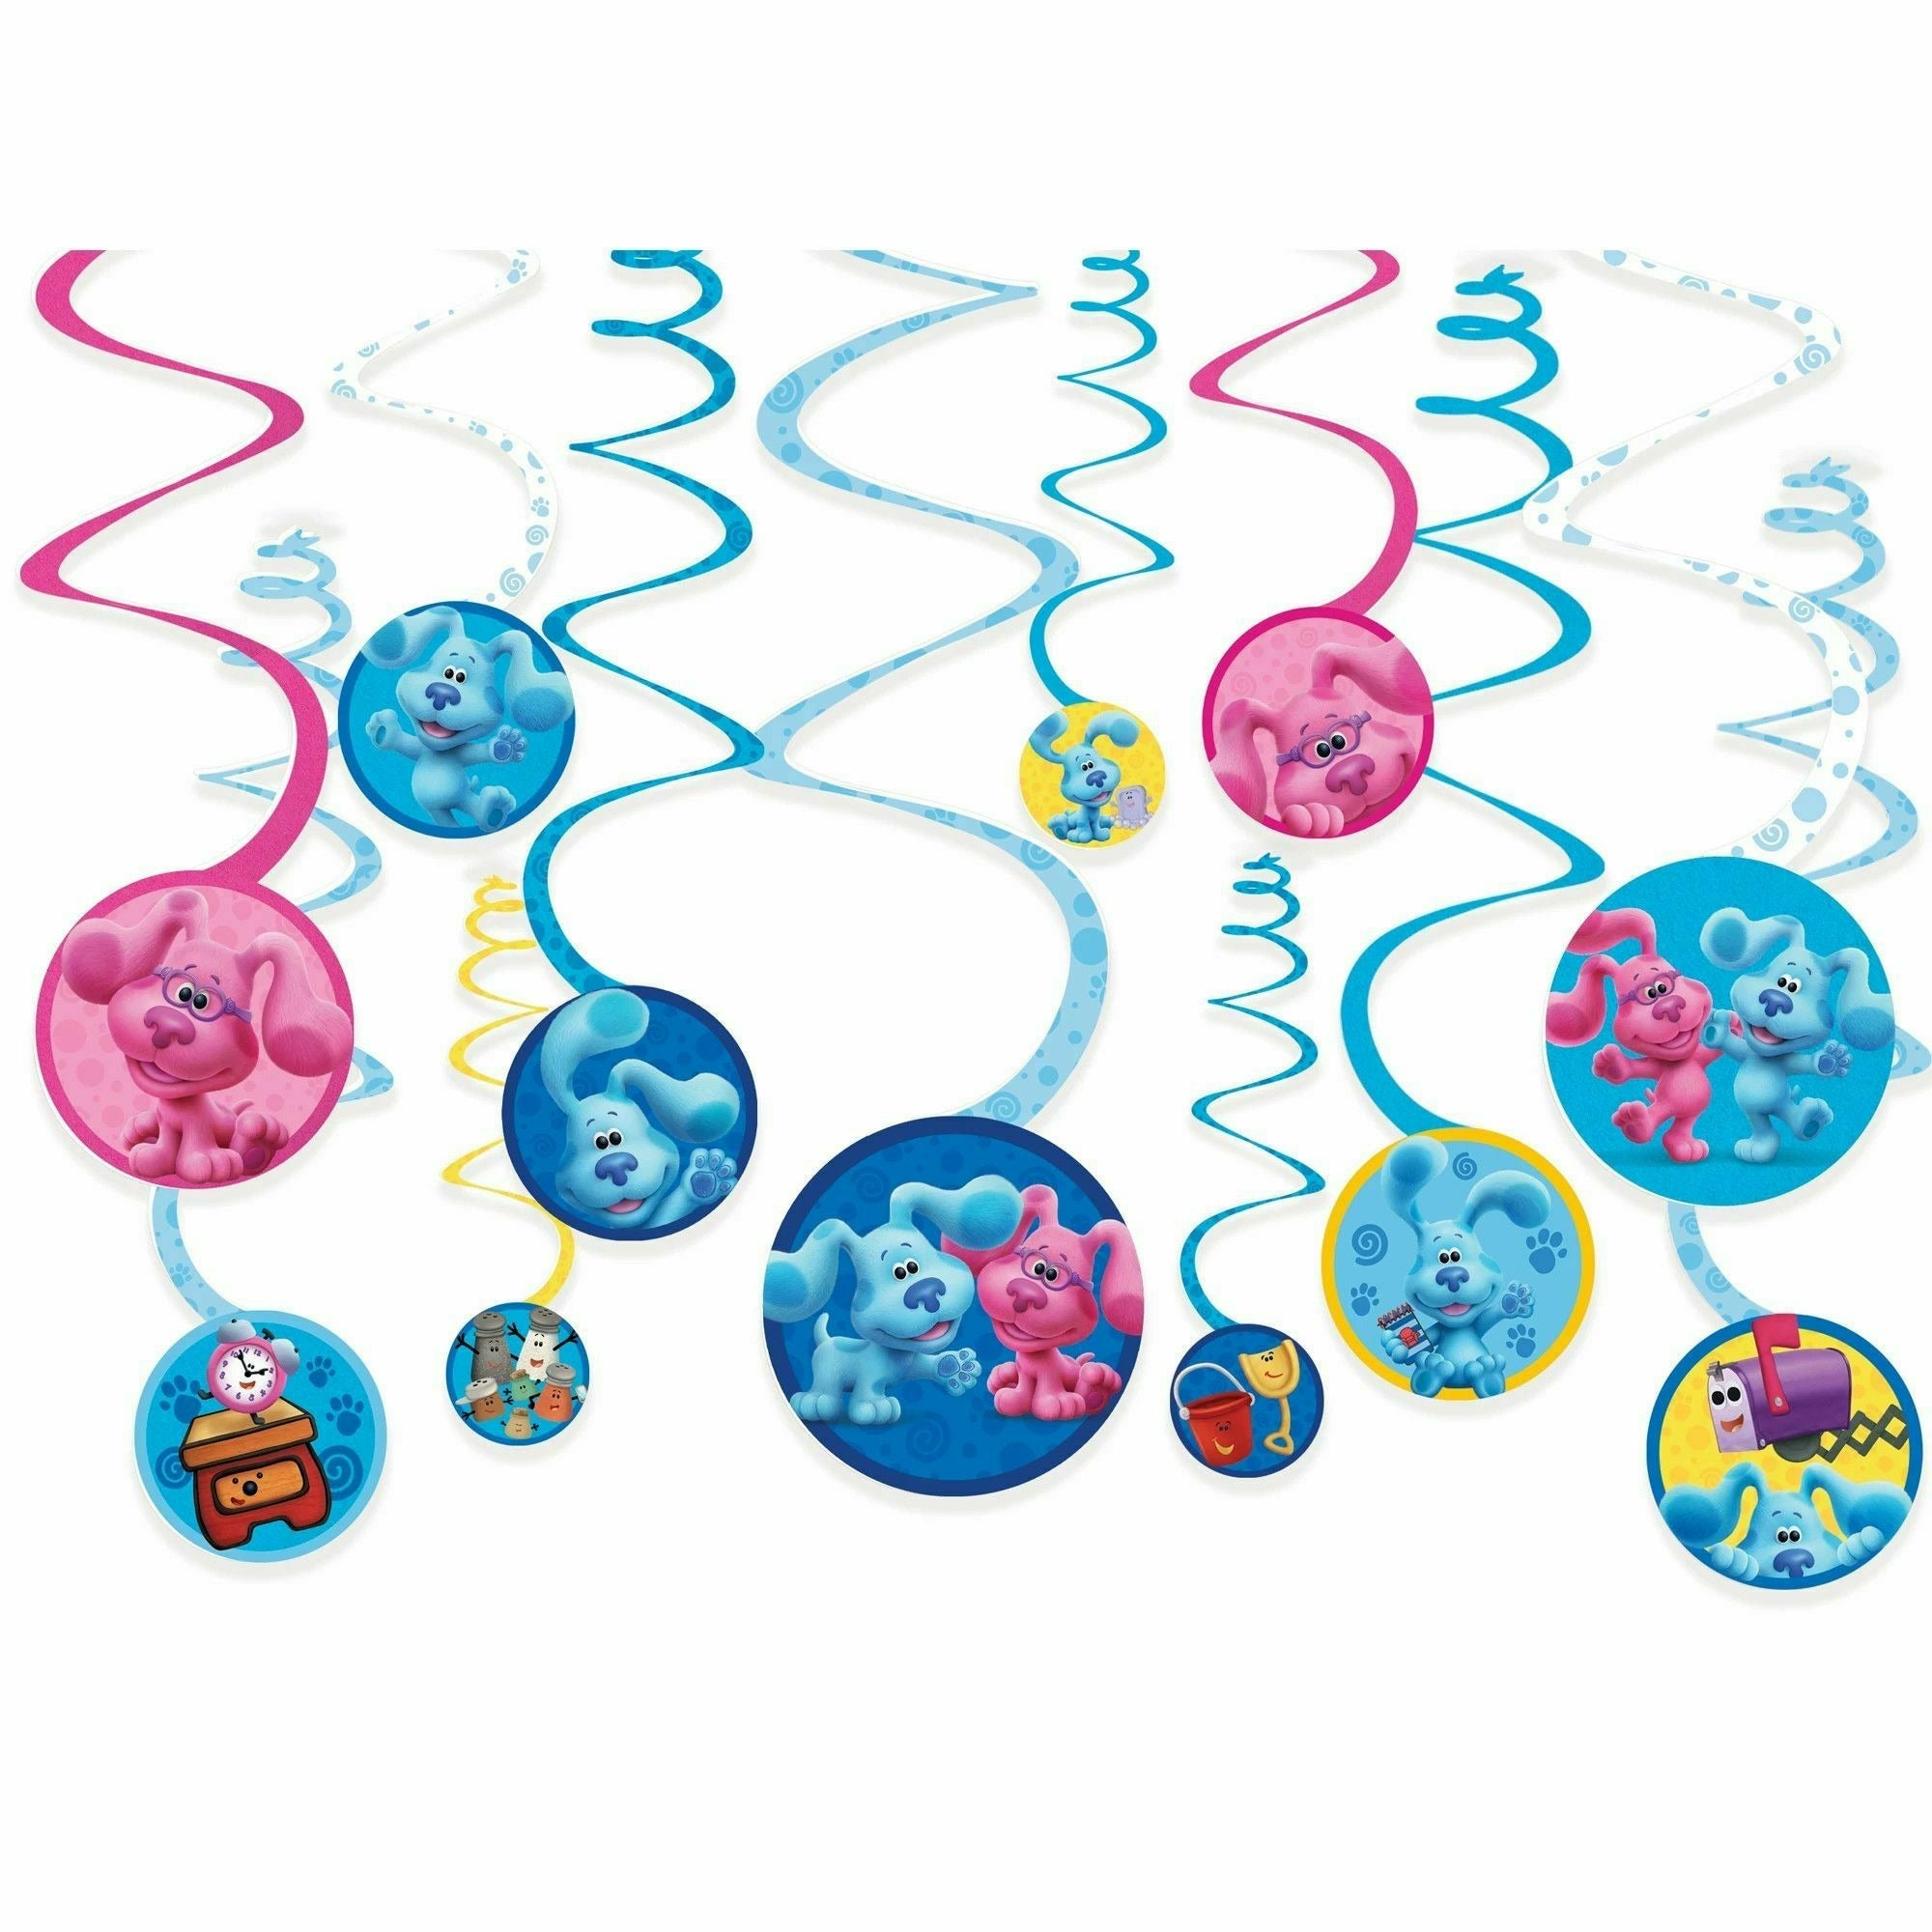 Amscan BIRTHDAY: JUVENILE Blues Clues Spiral Decorations